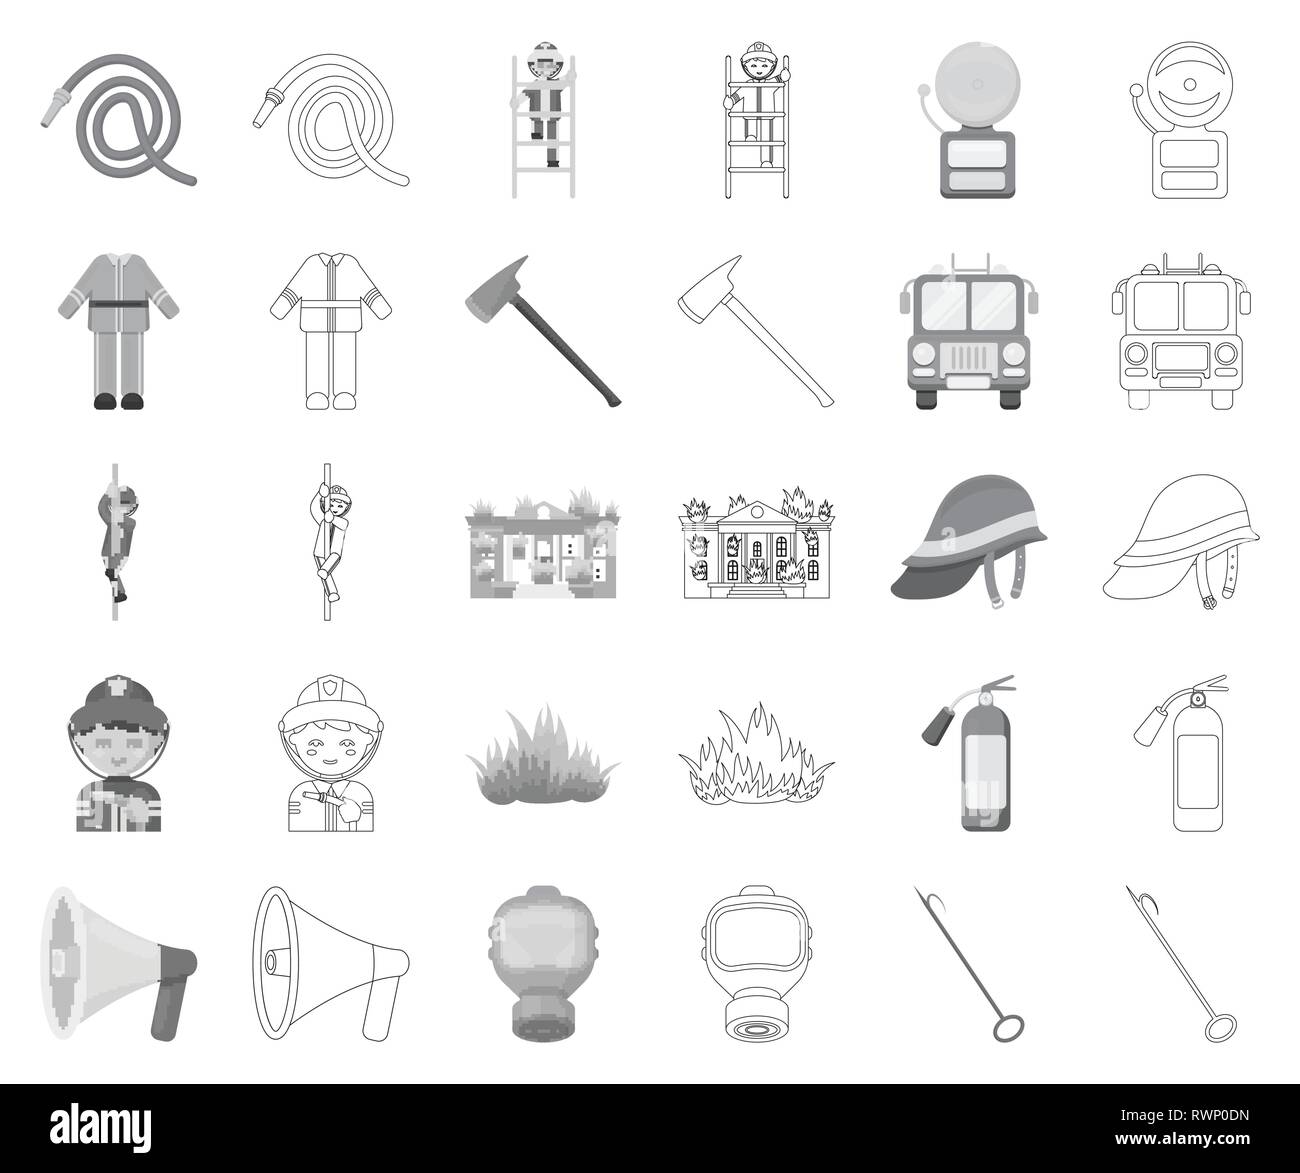 accessories,apparatus,art,attribute,axe,bucket,building,bunker,collection,conical,department,design,equipment,extinguishing,extingushier,fire,firefighter,firefighting,flame,gas,gear,helmet,icon,illustration,isolated,logo,mask,monochrome,outline,organization,pike,pole,pump,ring,separation,service,set,sign,slide,symbol,tools,vector,web Vector Vectors , Stock Vector